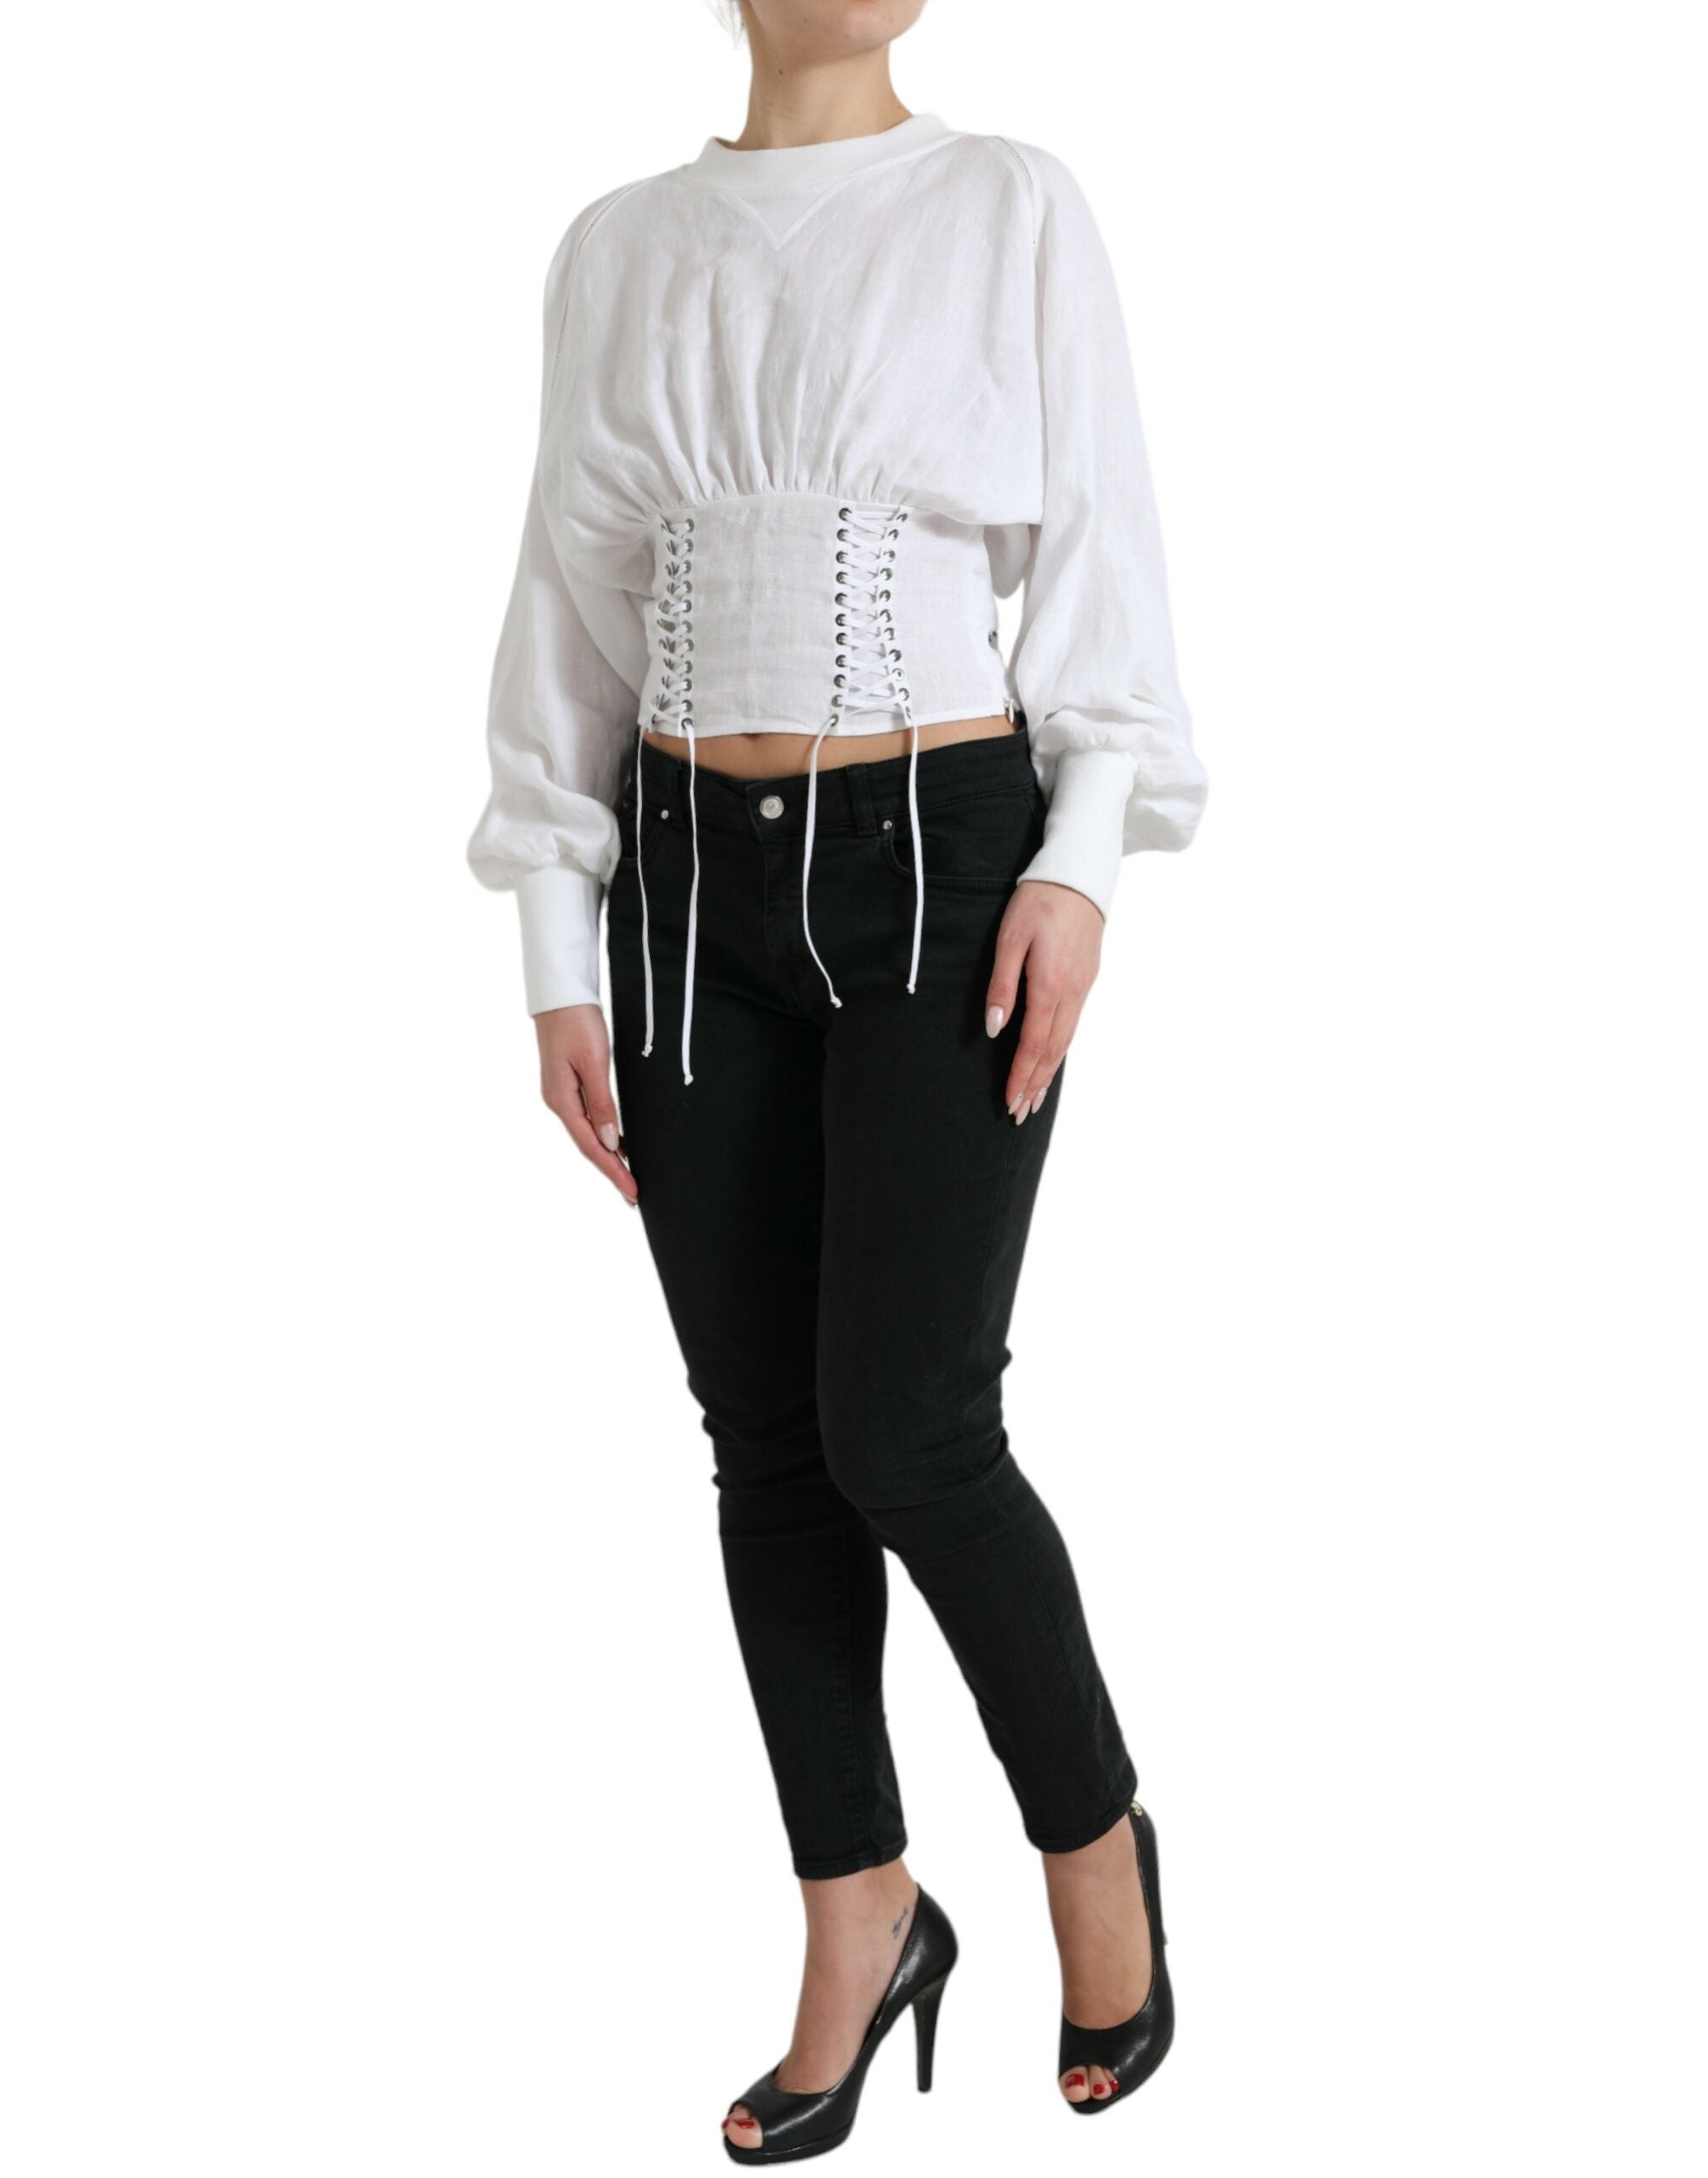 Dolce & Gabbana Elegant White Lace-Up Corset Cropped Top